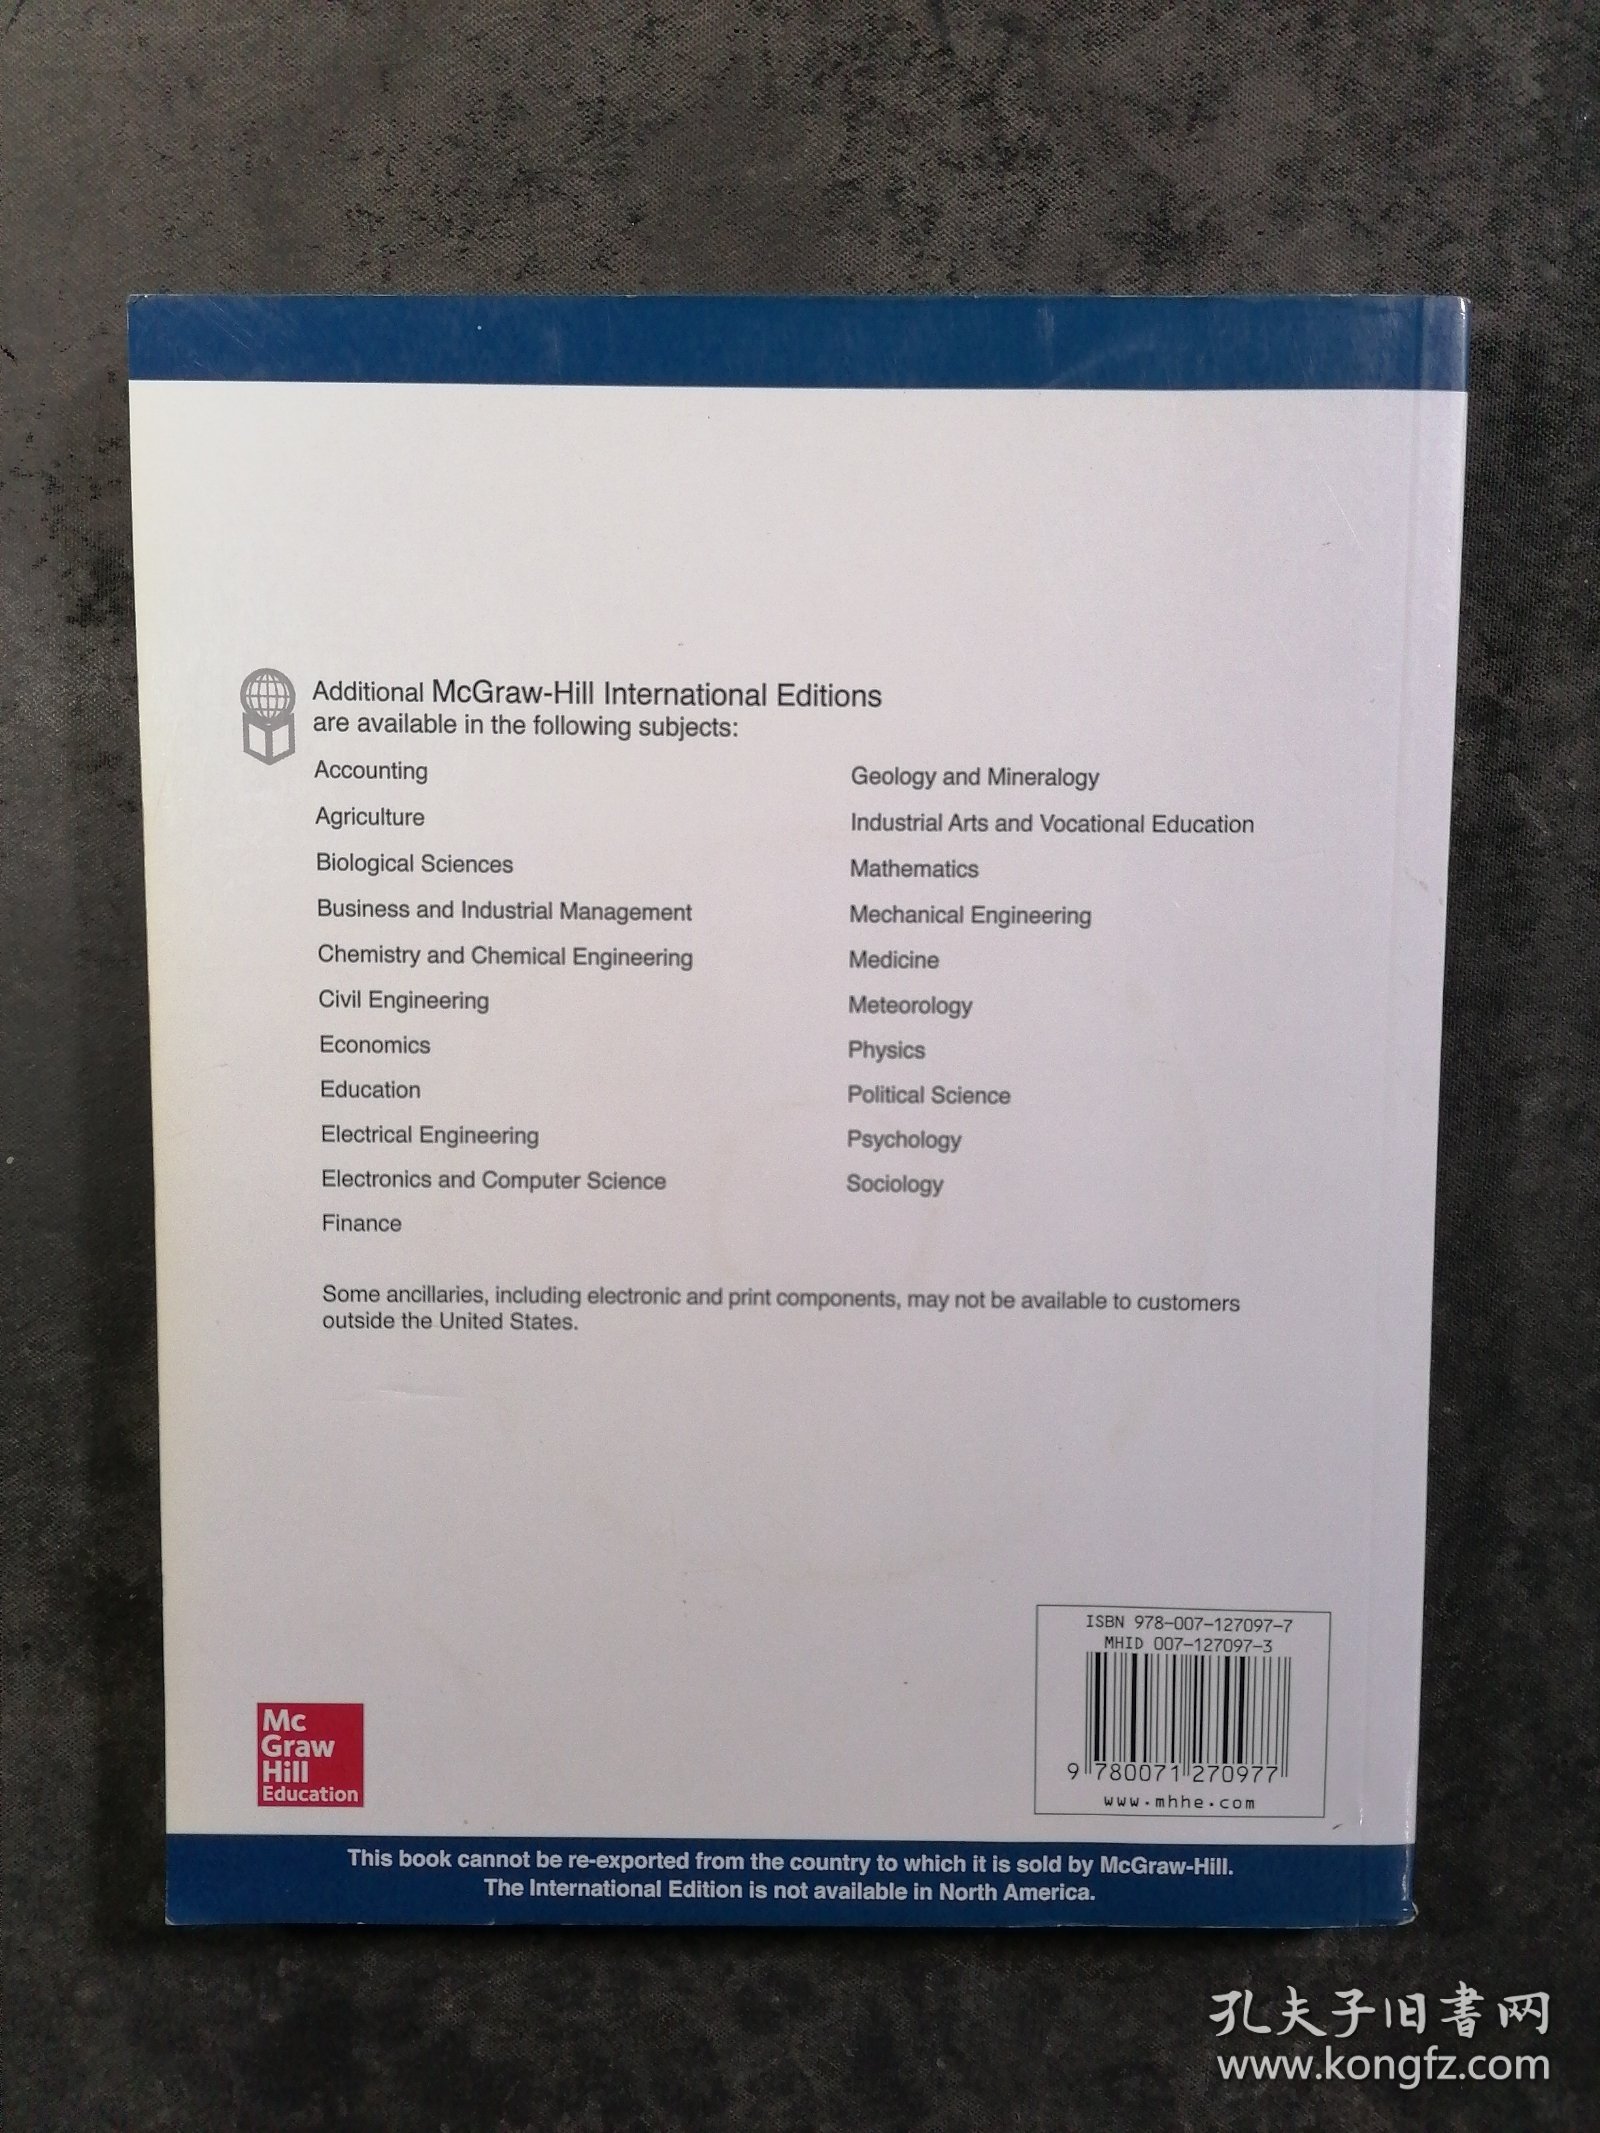 Designing and Managing the Supply Chain：concepts,strageies and case studies(3rd Edition)